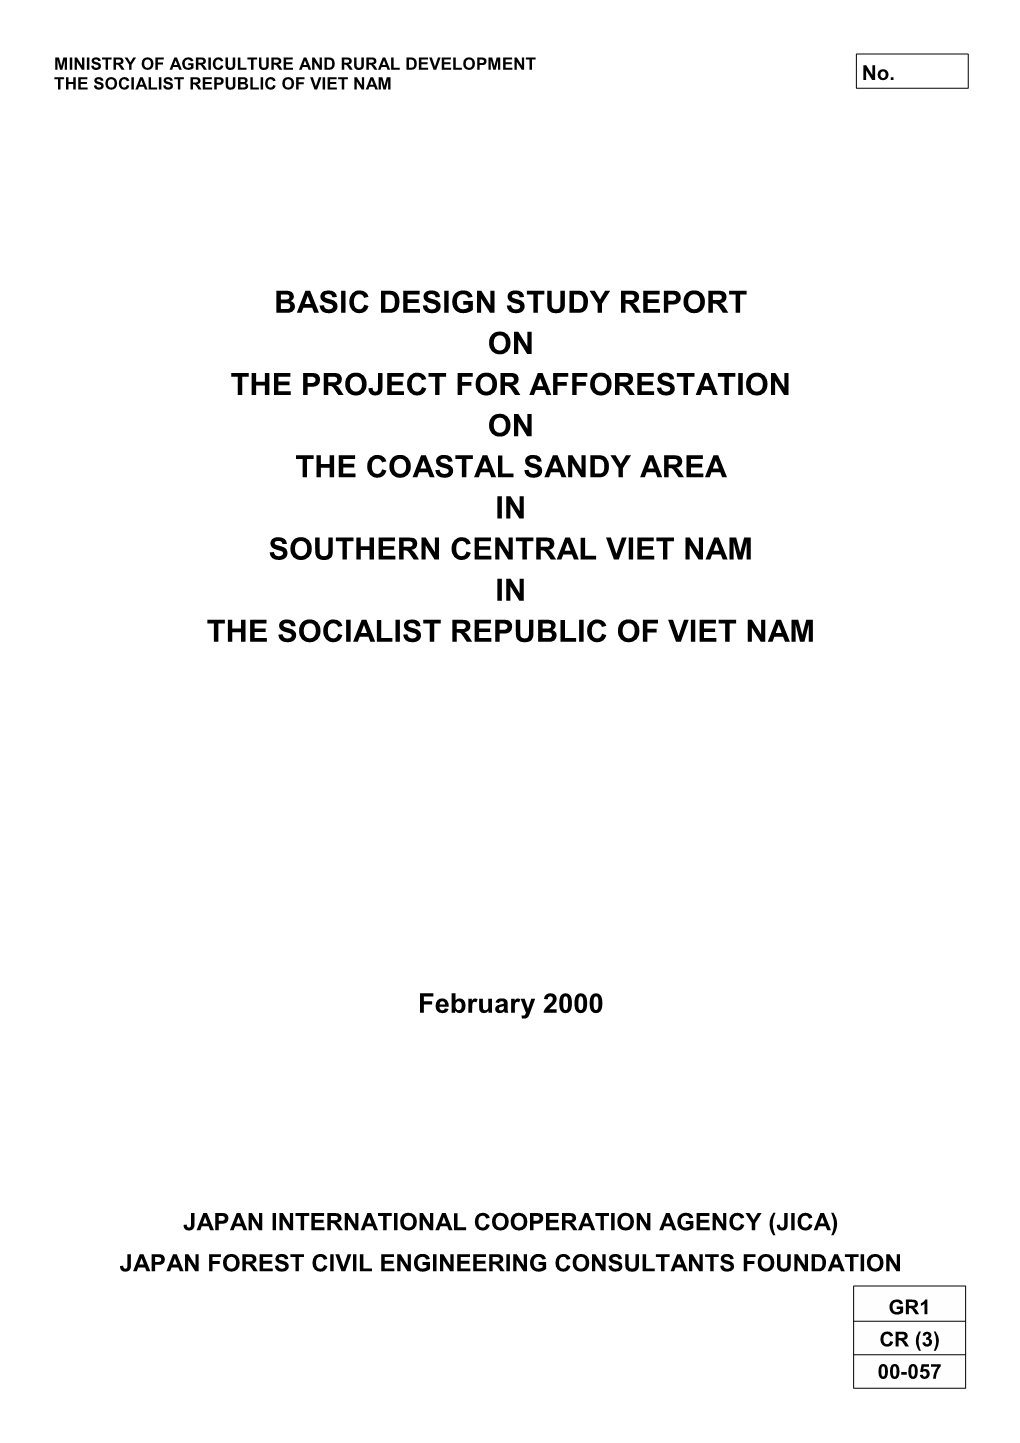 Basic Design Study Report on the Project for Afforestation on the Coastal Sandy Area in Southern Central Viet Nam in the Socialist Republic of Viet Nam